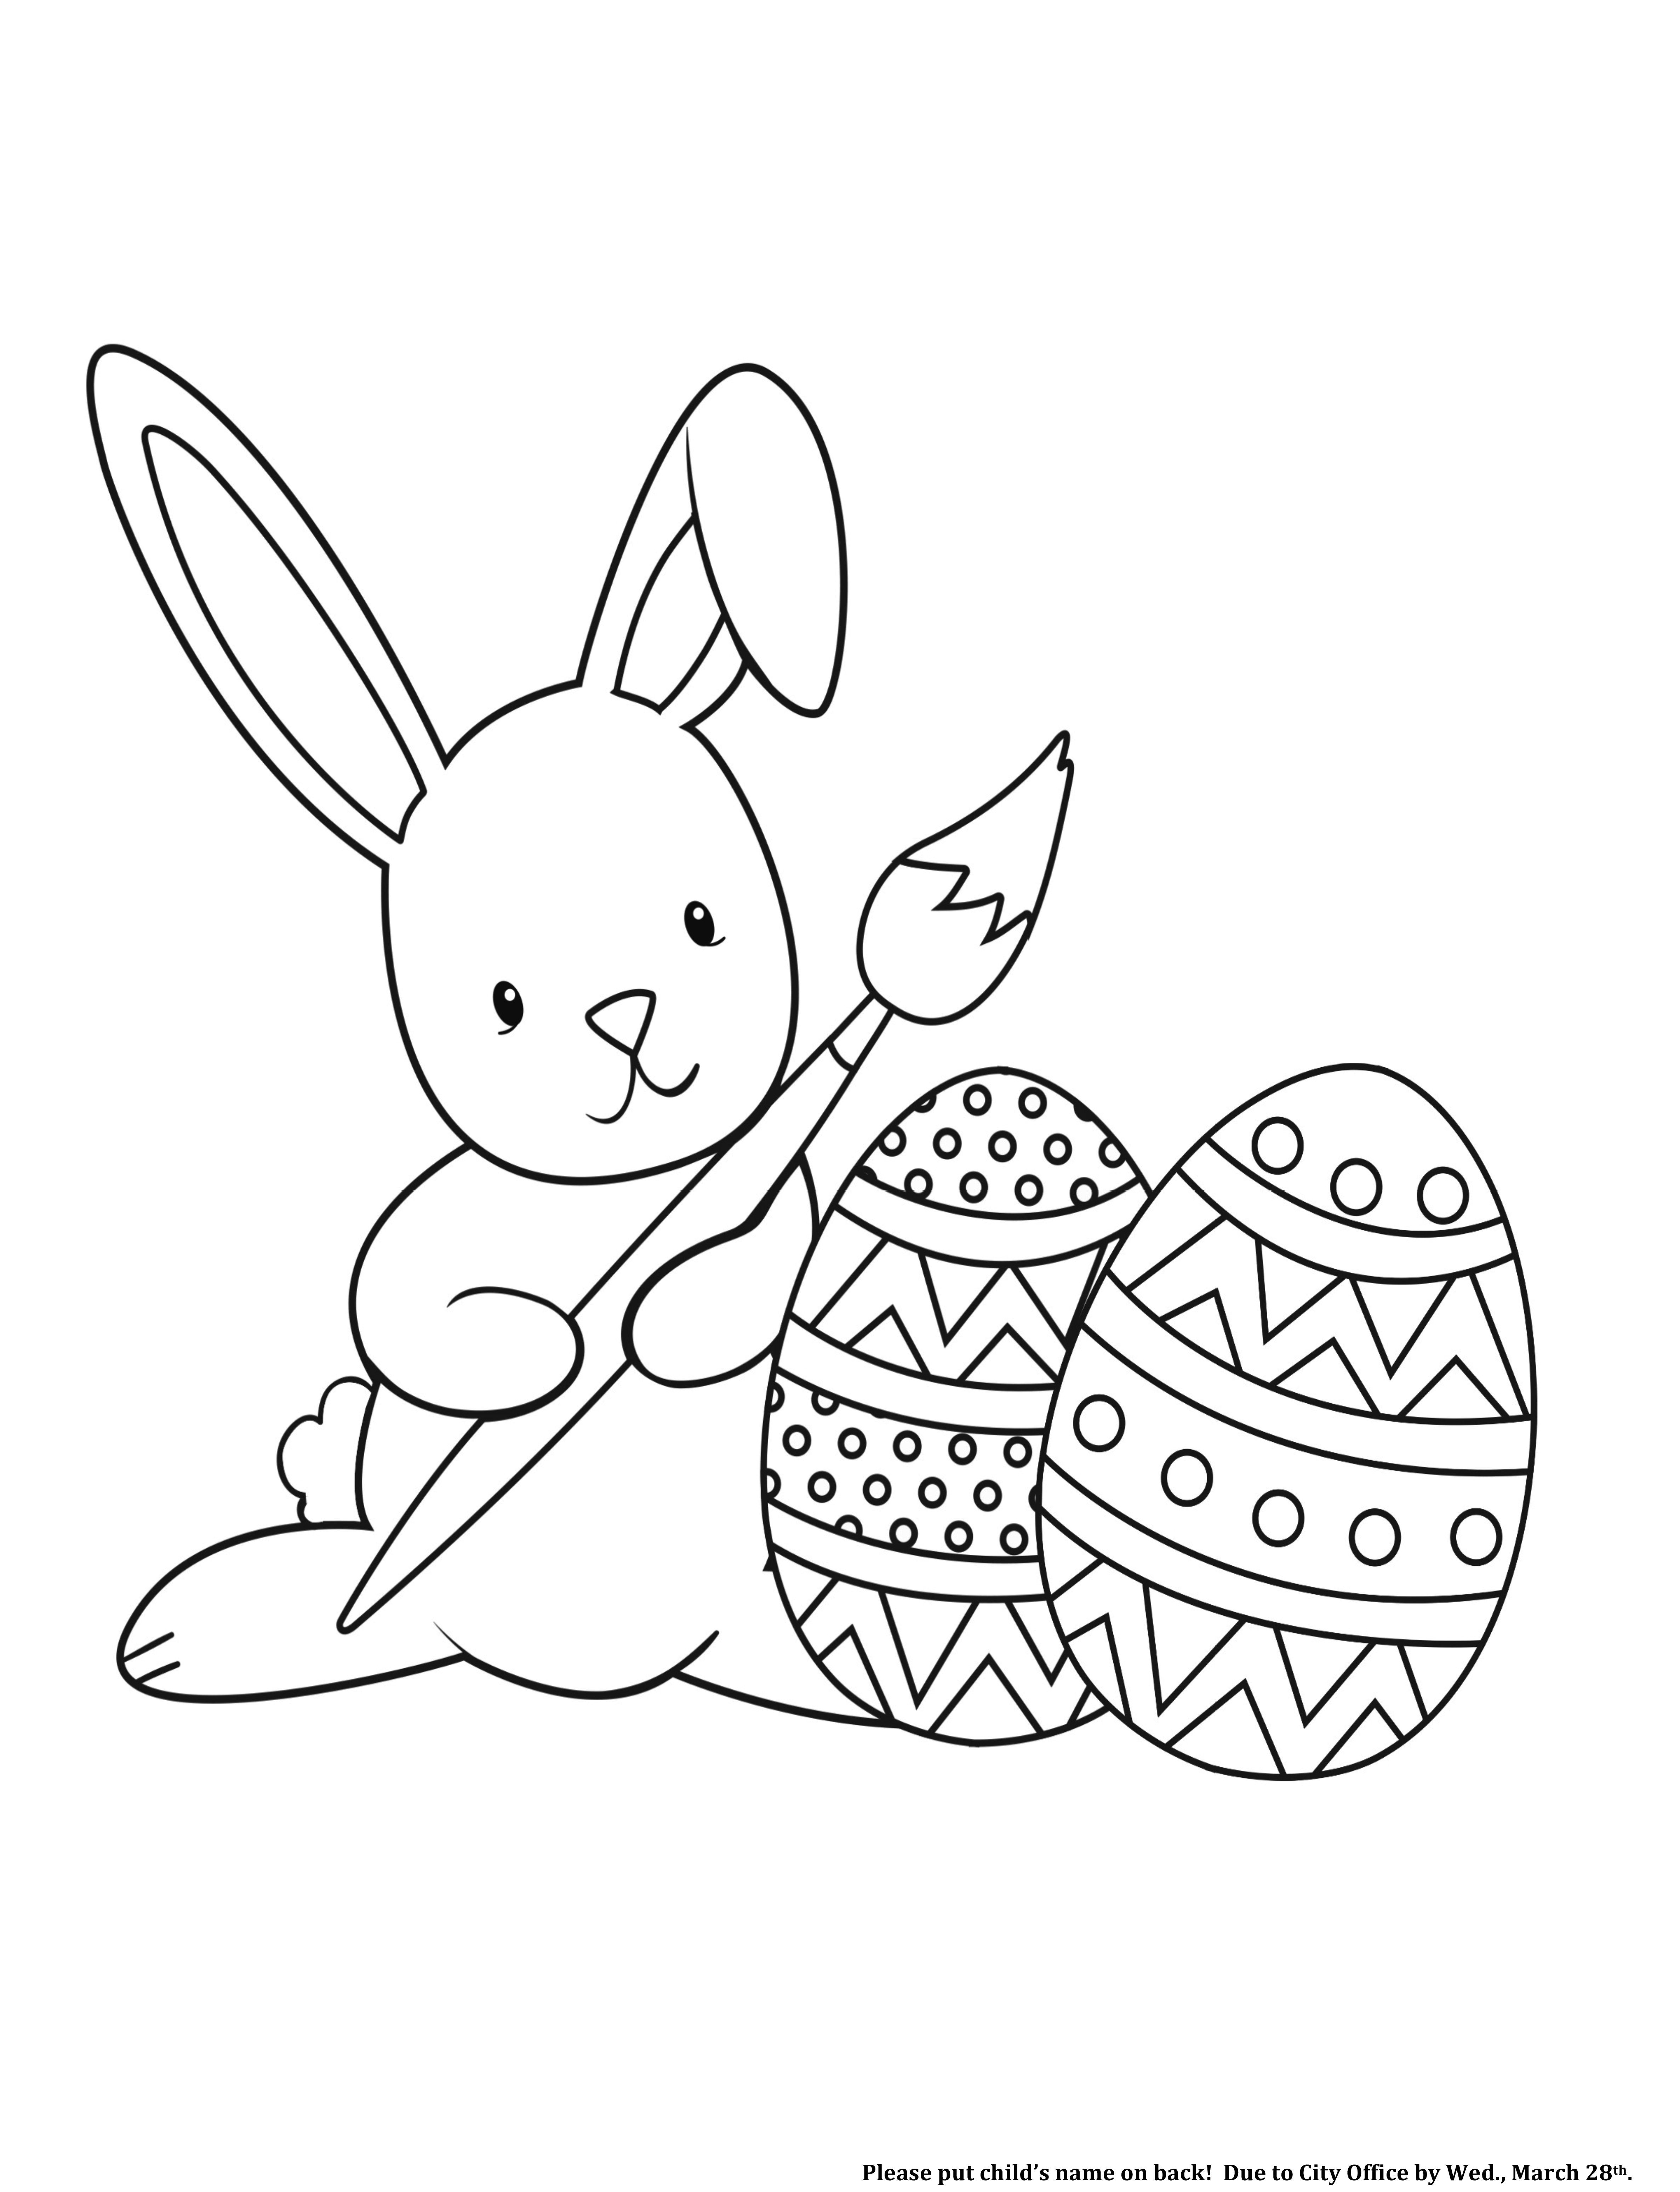 Easter Egg Hunt & Coloring Contest! | Hospers Iowa